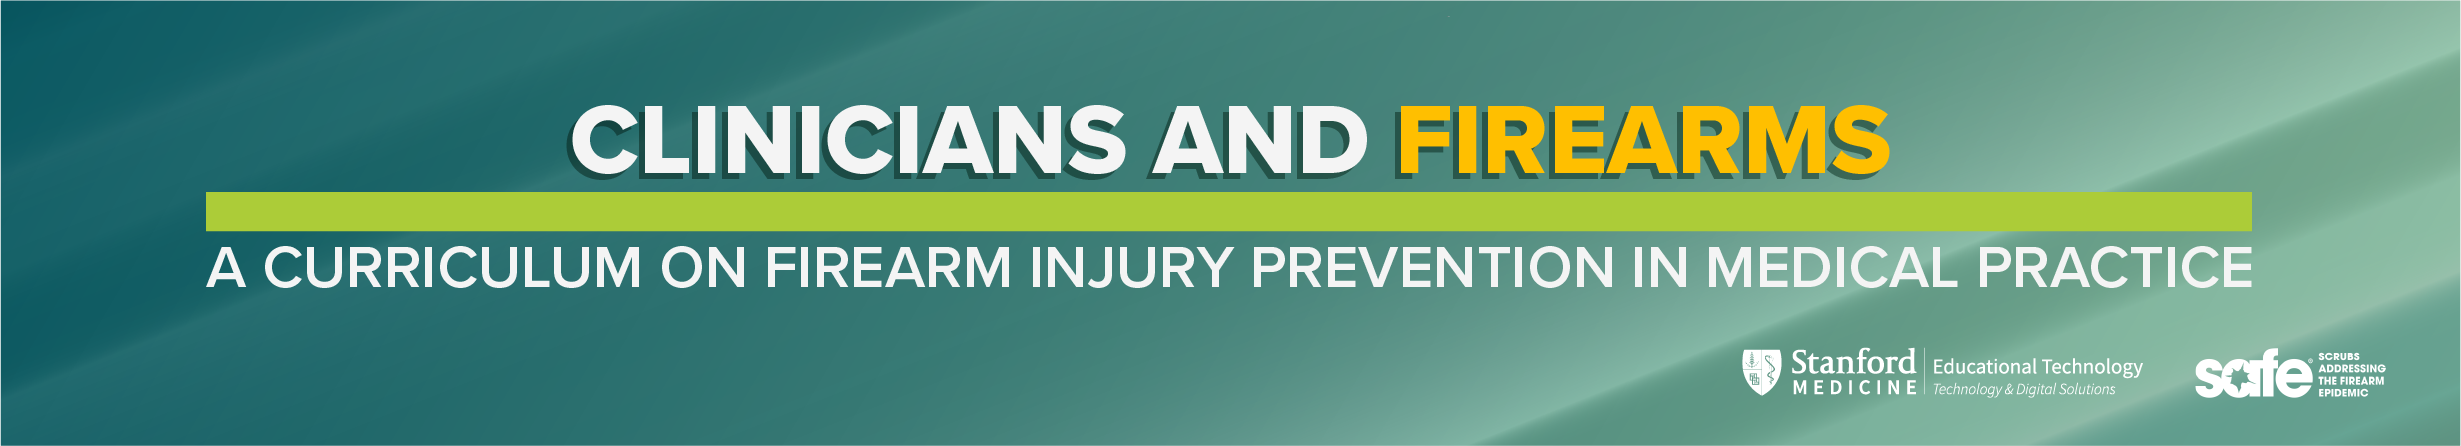 Clinicians and Firearms 2.0: A Curriculum on Firearm Injury Prevention in Medical Practice Banner